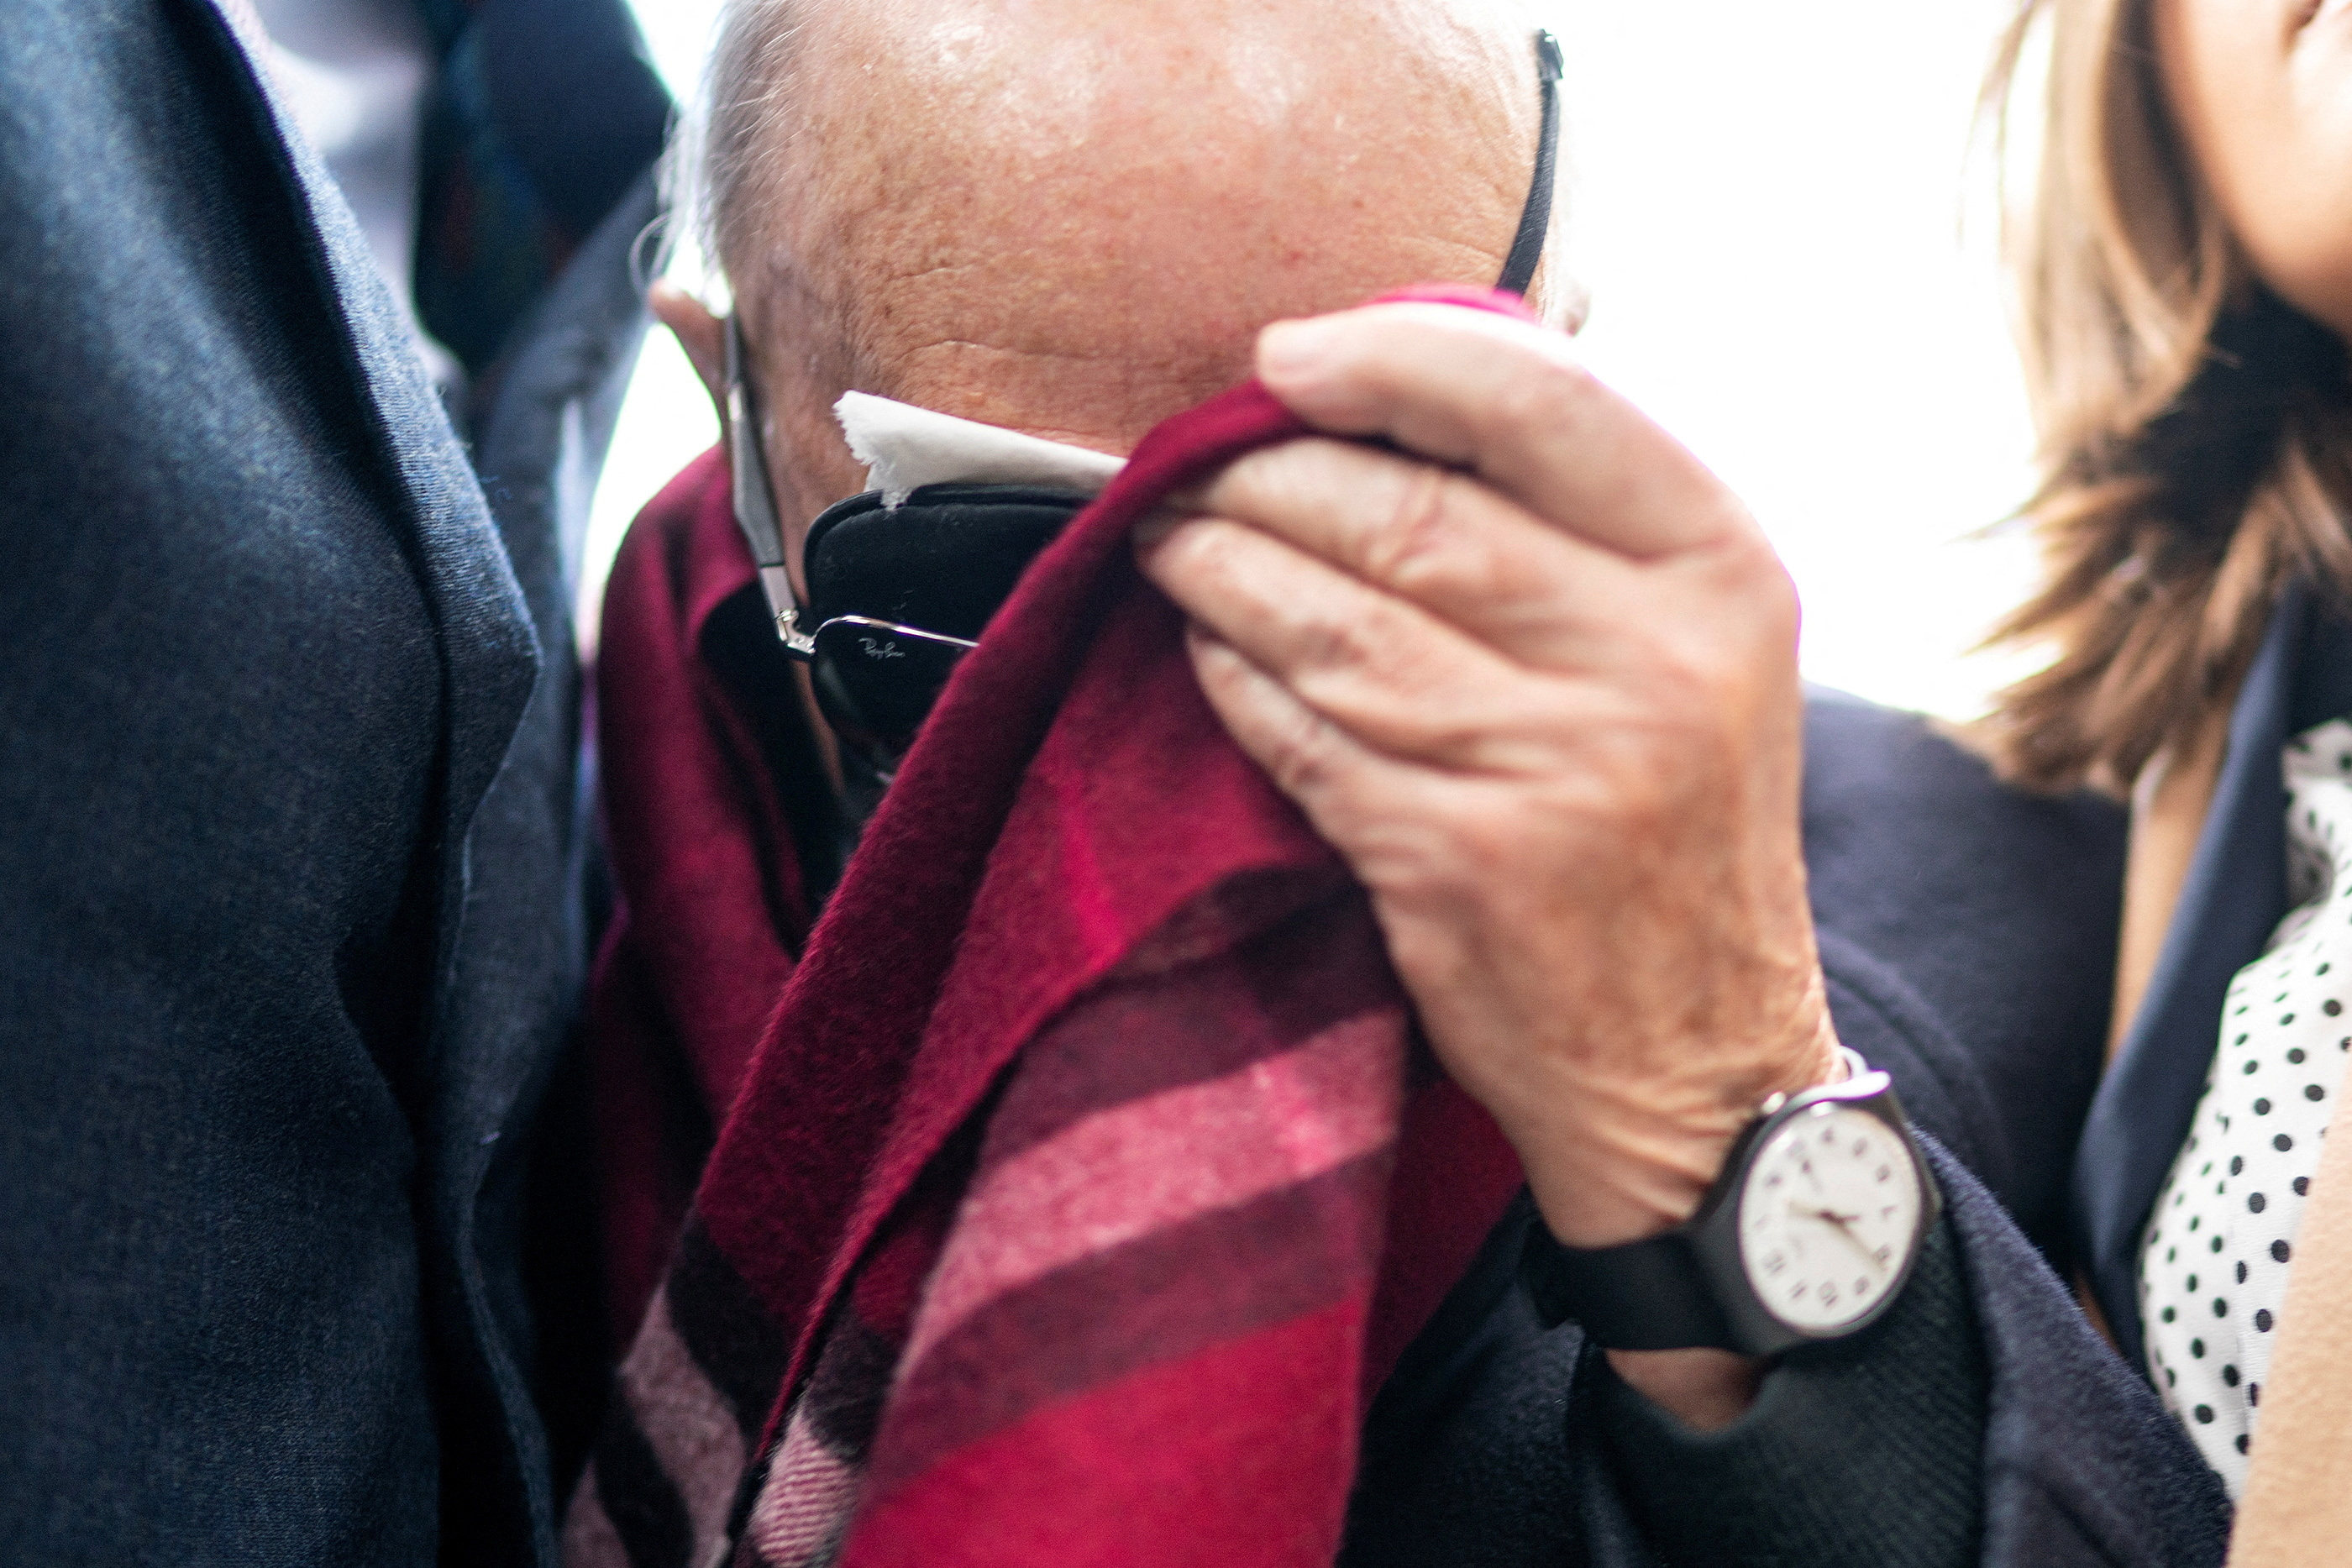 British billionaire Joe Lewis hides his face with a scarf as he arrives at court in New York for sentencing on Thursday. Photo: Reuters